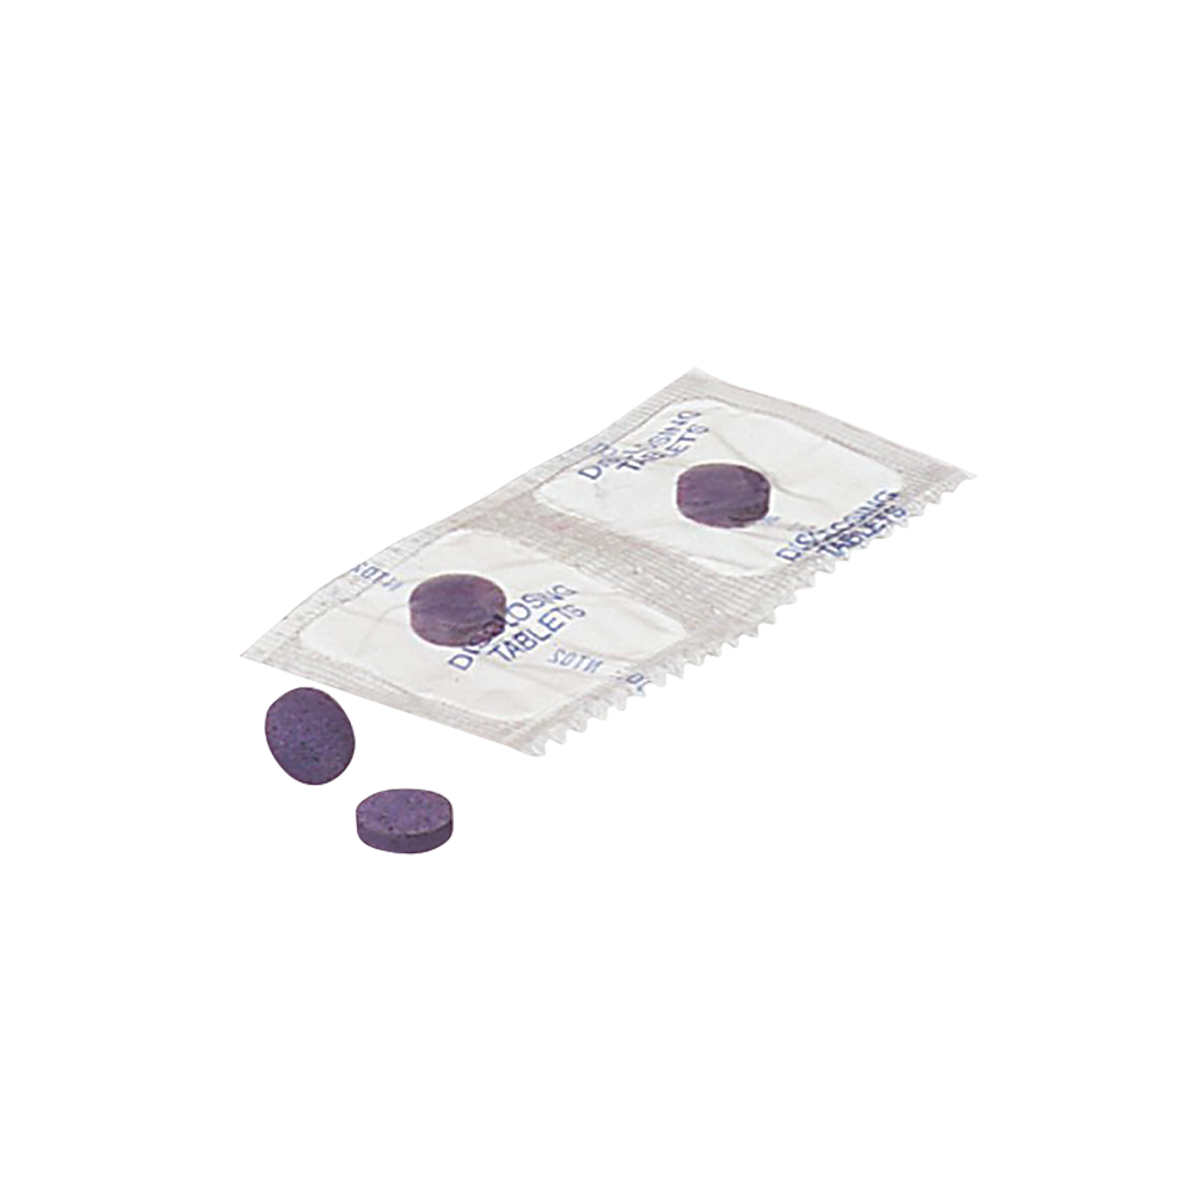 Individually Wrapped Tablets